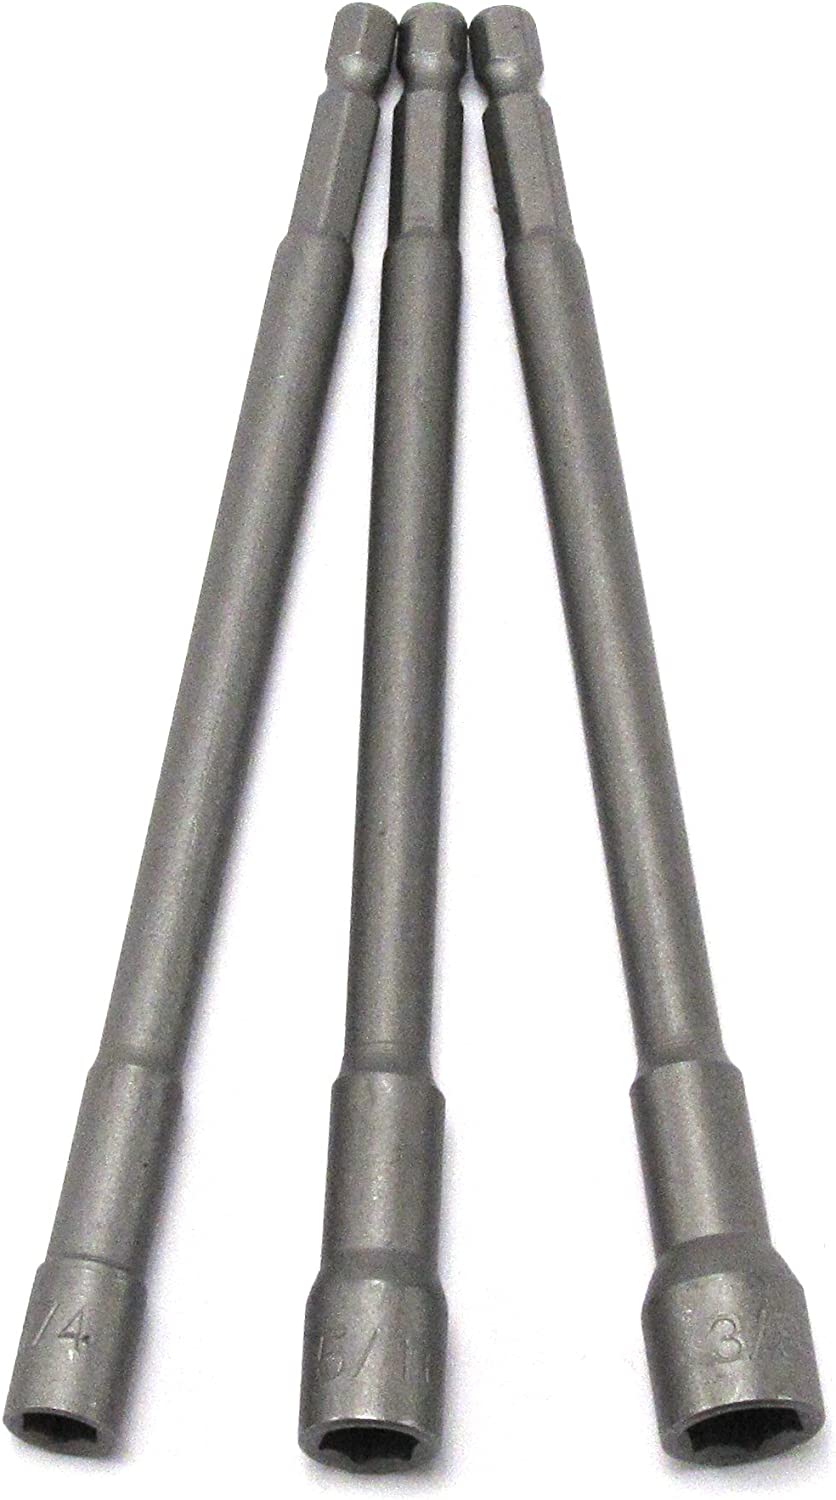 3 pc 6" Long Magnetic Nut Setter Sizes: 1/4",5/16" and 3/4" 2